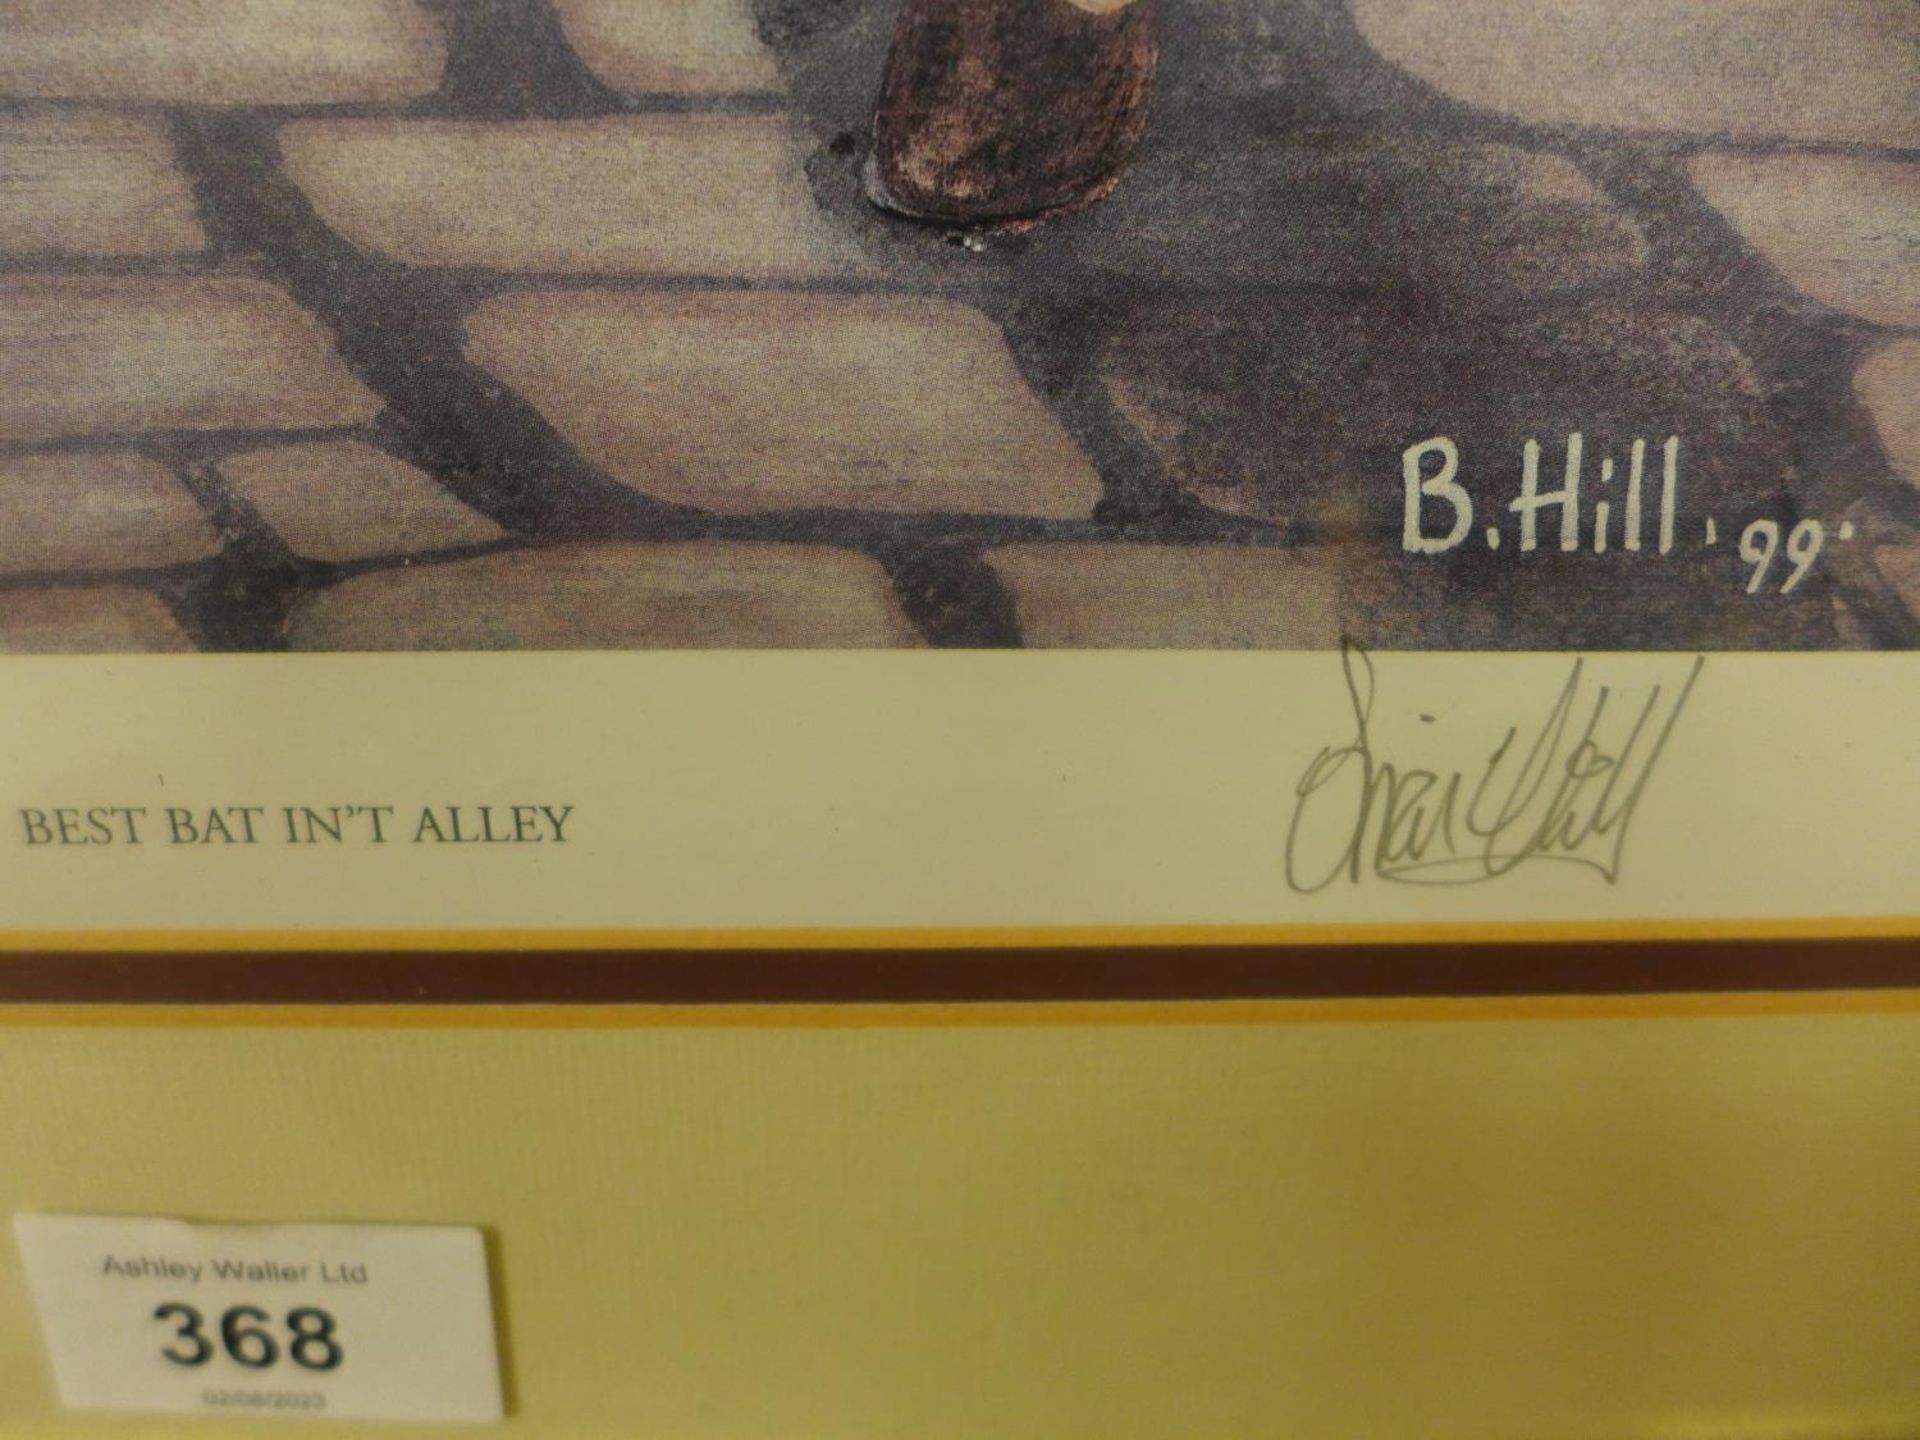 B. HILL (BRITISH LATE 20TH/EARLY 21ST CENTURY) 'BEST BAT IN'T ALLEY' LIMITED EDITION PRINT 6/750, - Image 3 of 3